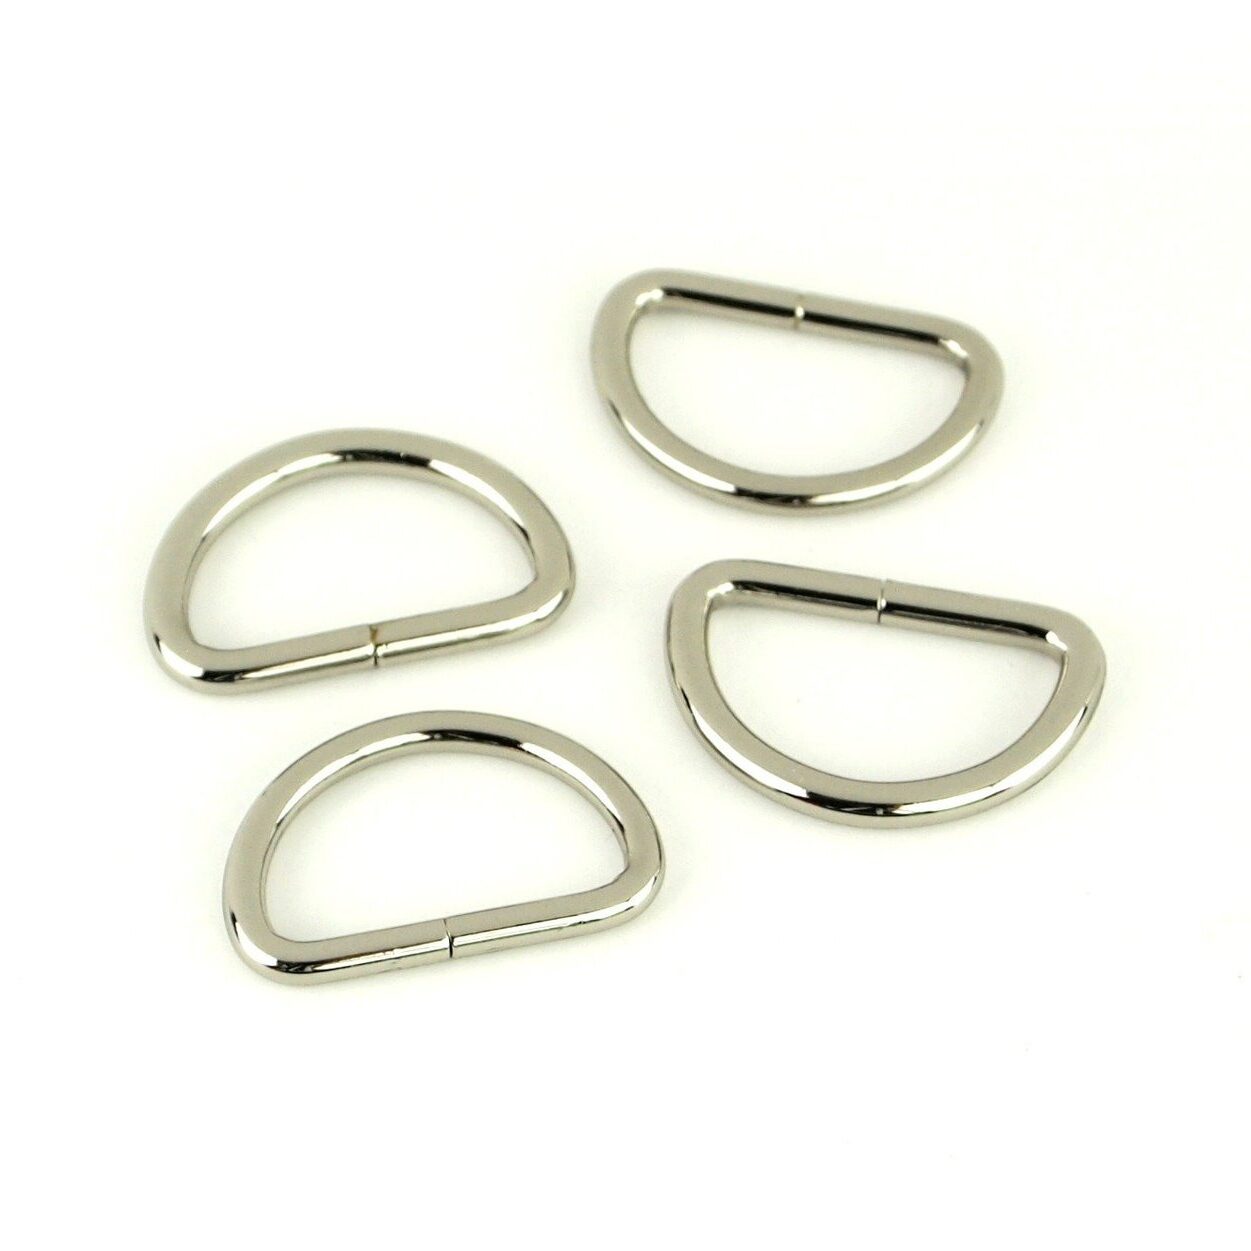 Silver D-ring square Ringalloy Metal D-ringpurse D Ring - Etsy | Square  rings, Ring bag, Silver